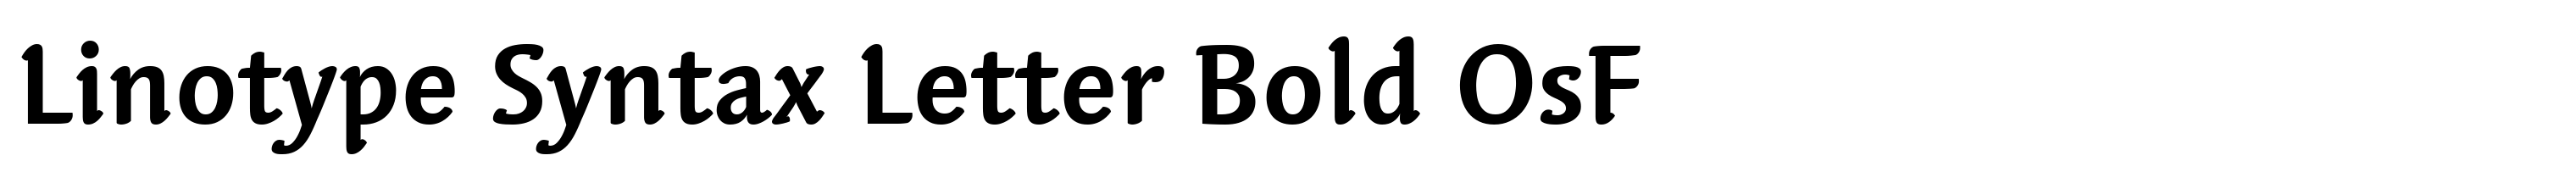 Linotype Syntax Letter Bold OsF